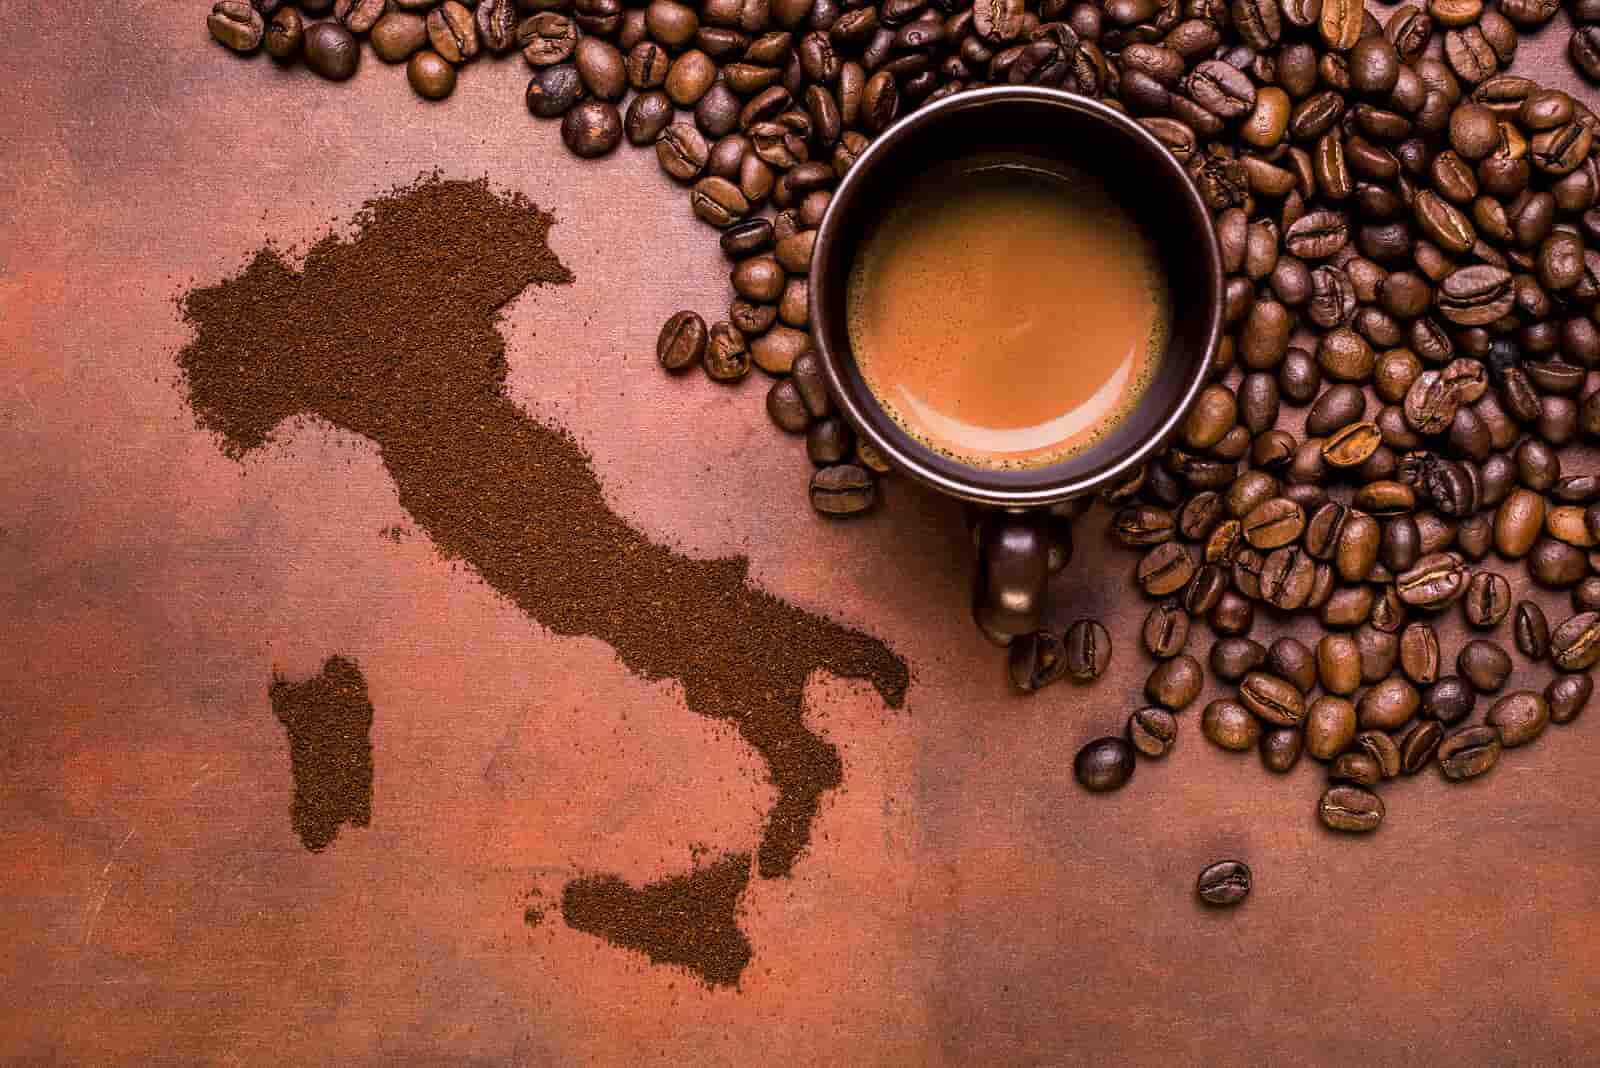 Italian coffee everything you need to know